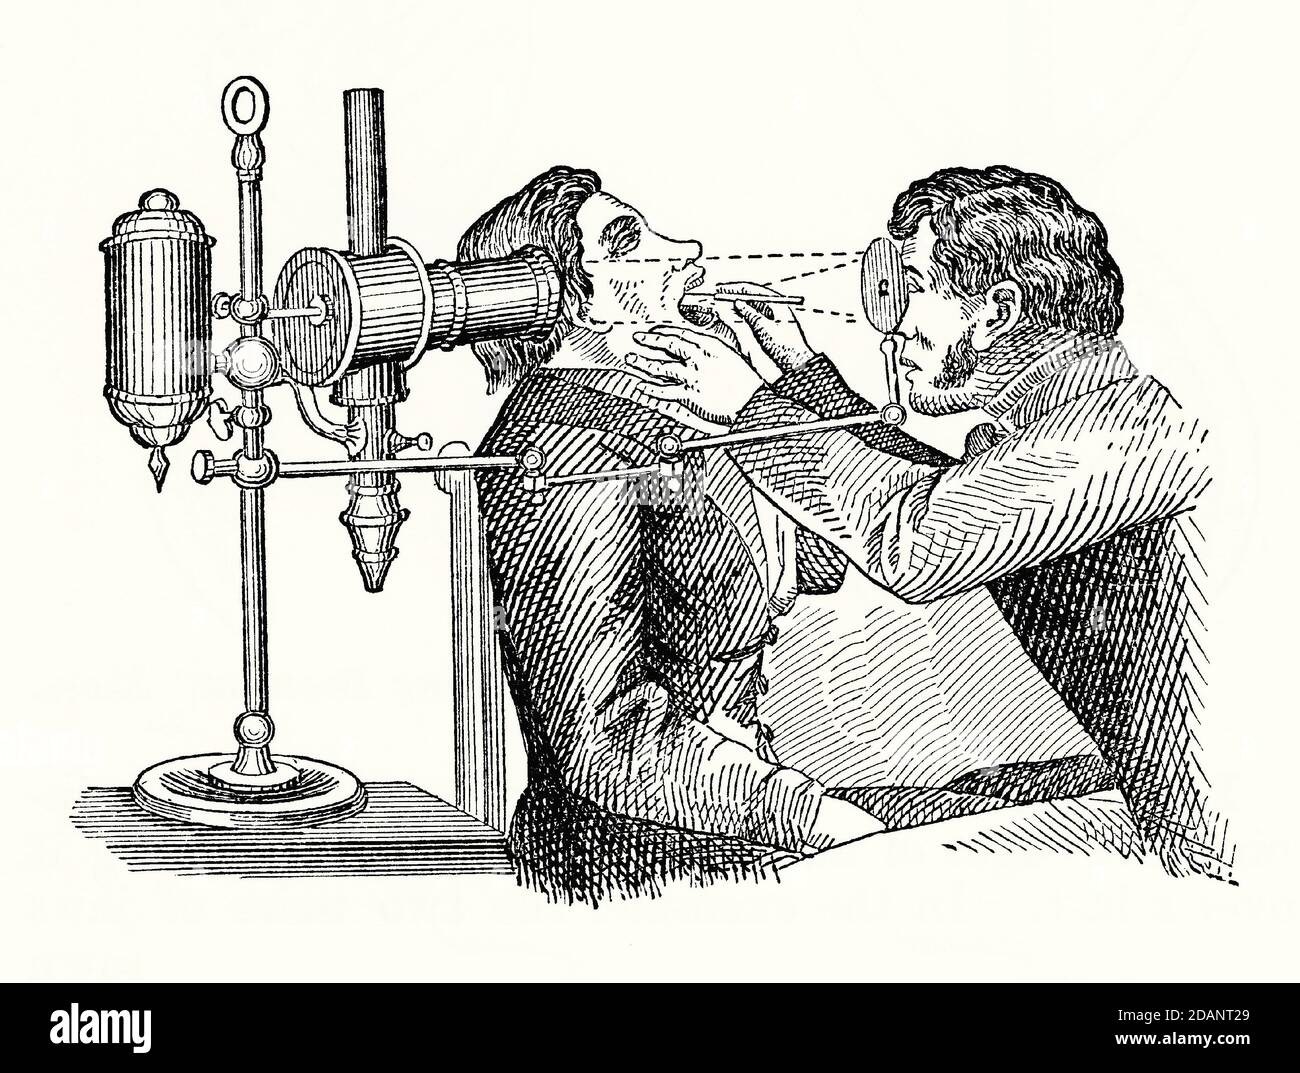 An old engraving of a patient having his larynx examined by a doctor using a laryngoscope. It is from a Victorian mechanical book of the 1880s. Laryngoscopy is endoscopy of the larynx, part of the throat in order to view the vocal folds and the glottis. Many versions of the apparatus were invented in the 1800s. The one illustrated is a Tieman laryngoscope. An artificial light source (left) shines onto the concave mirror the doctor holds and is reflected down the patient’s mouth onto a smaller mirror on the end of the instrument inserted into the mouth, illuminating the area for inspection. Stock Photo